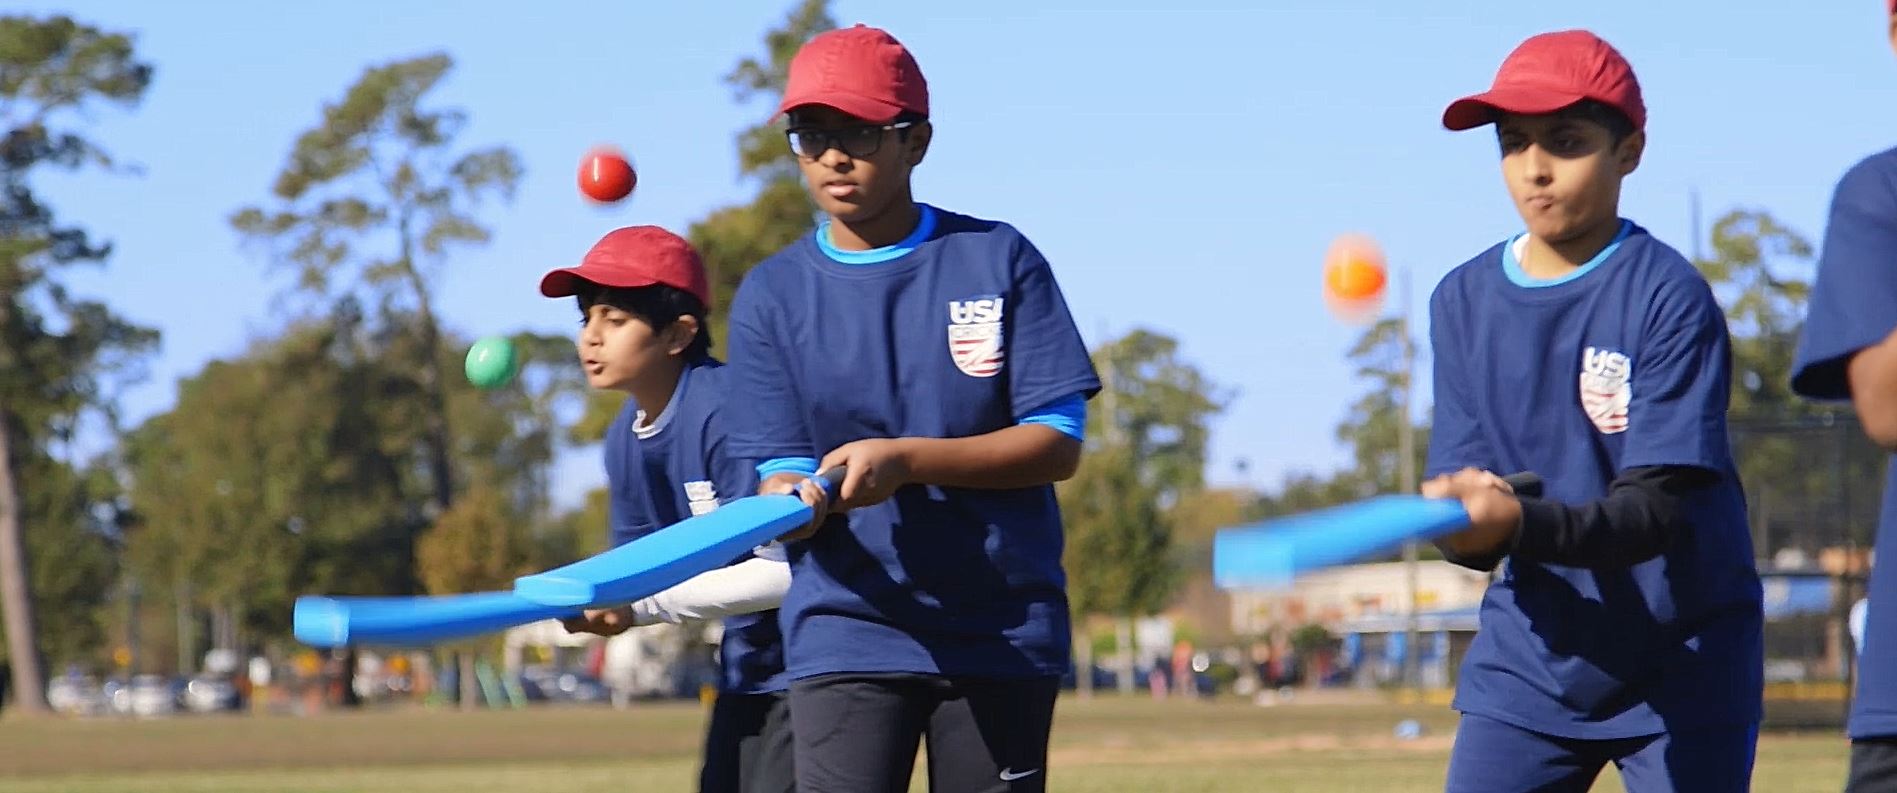 USA Cricket seeks expression of interest for Volunteer Youth Coordinators across the country